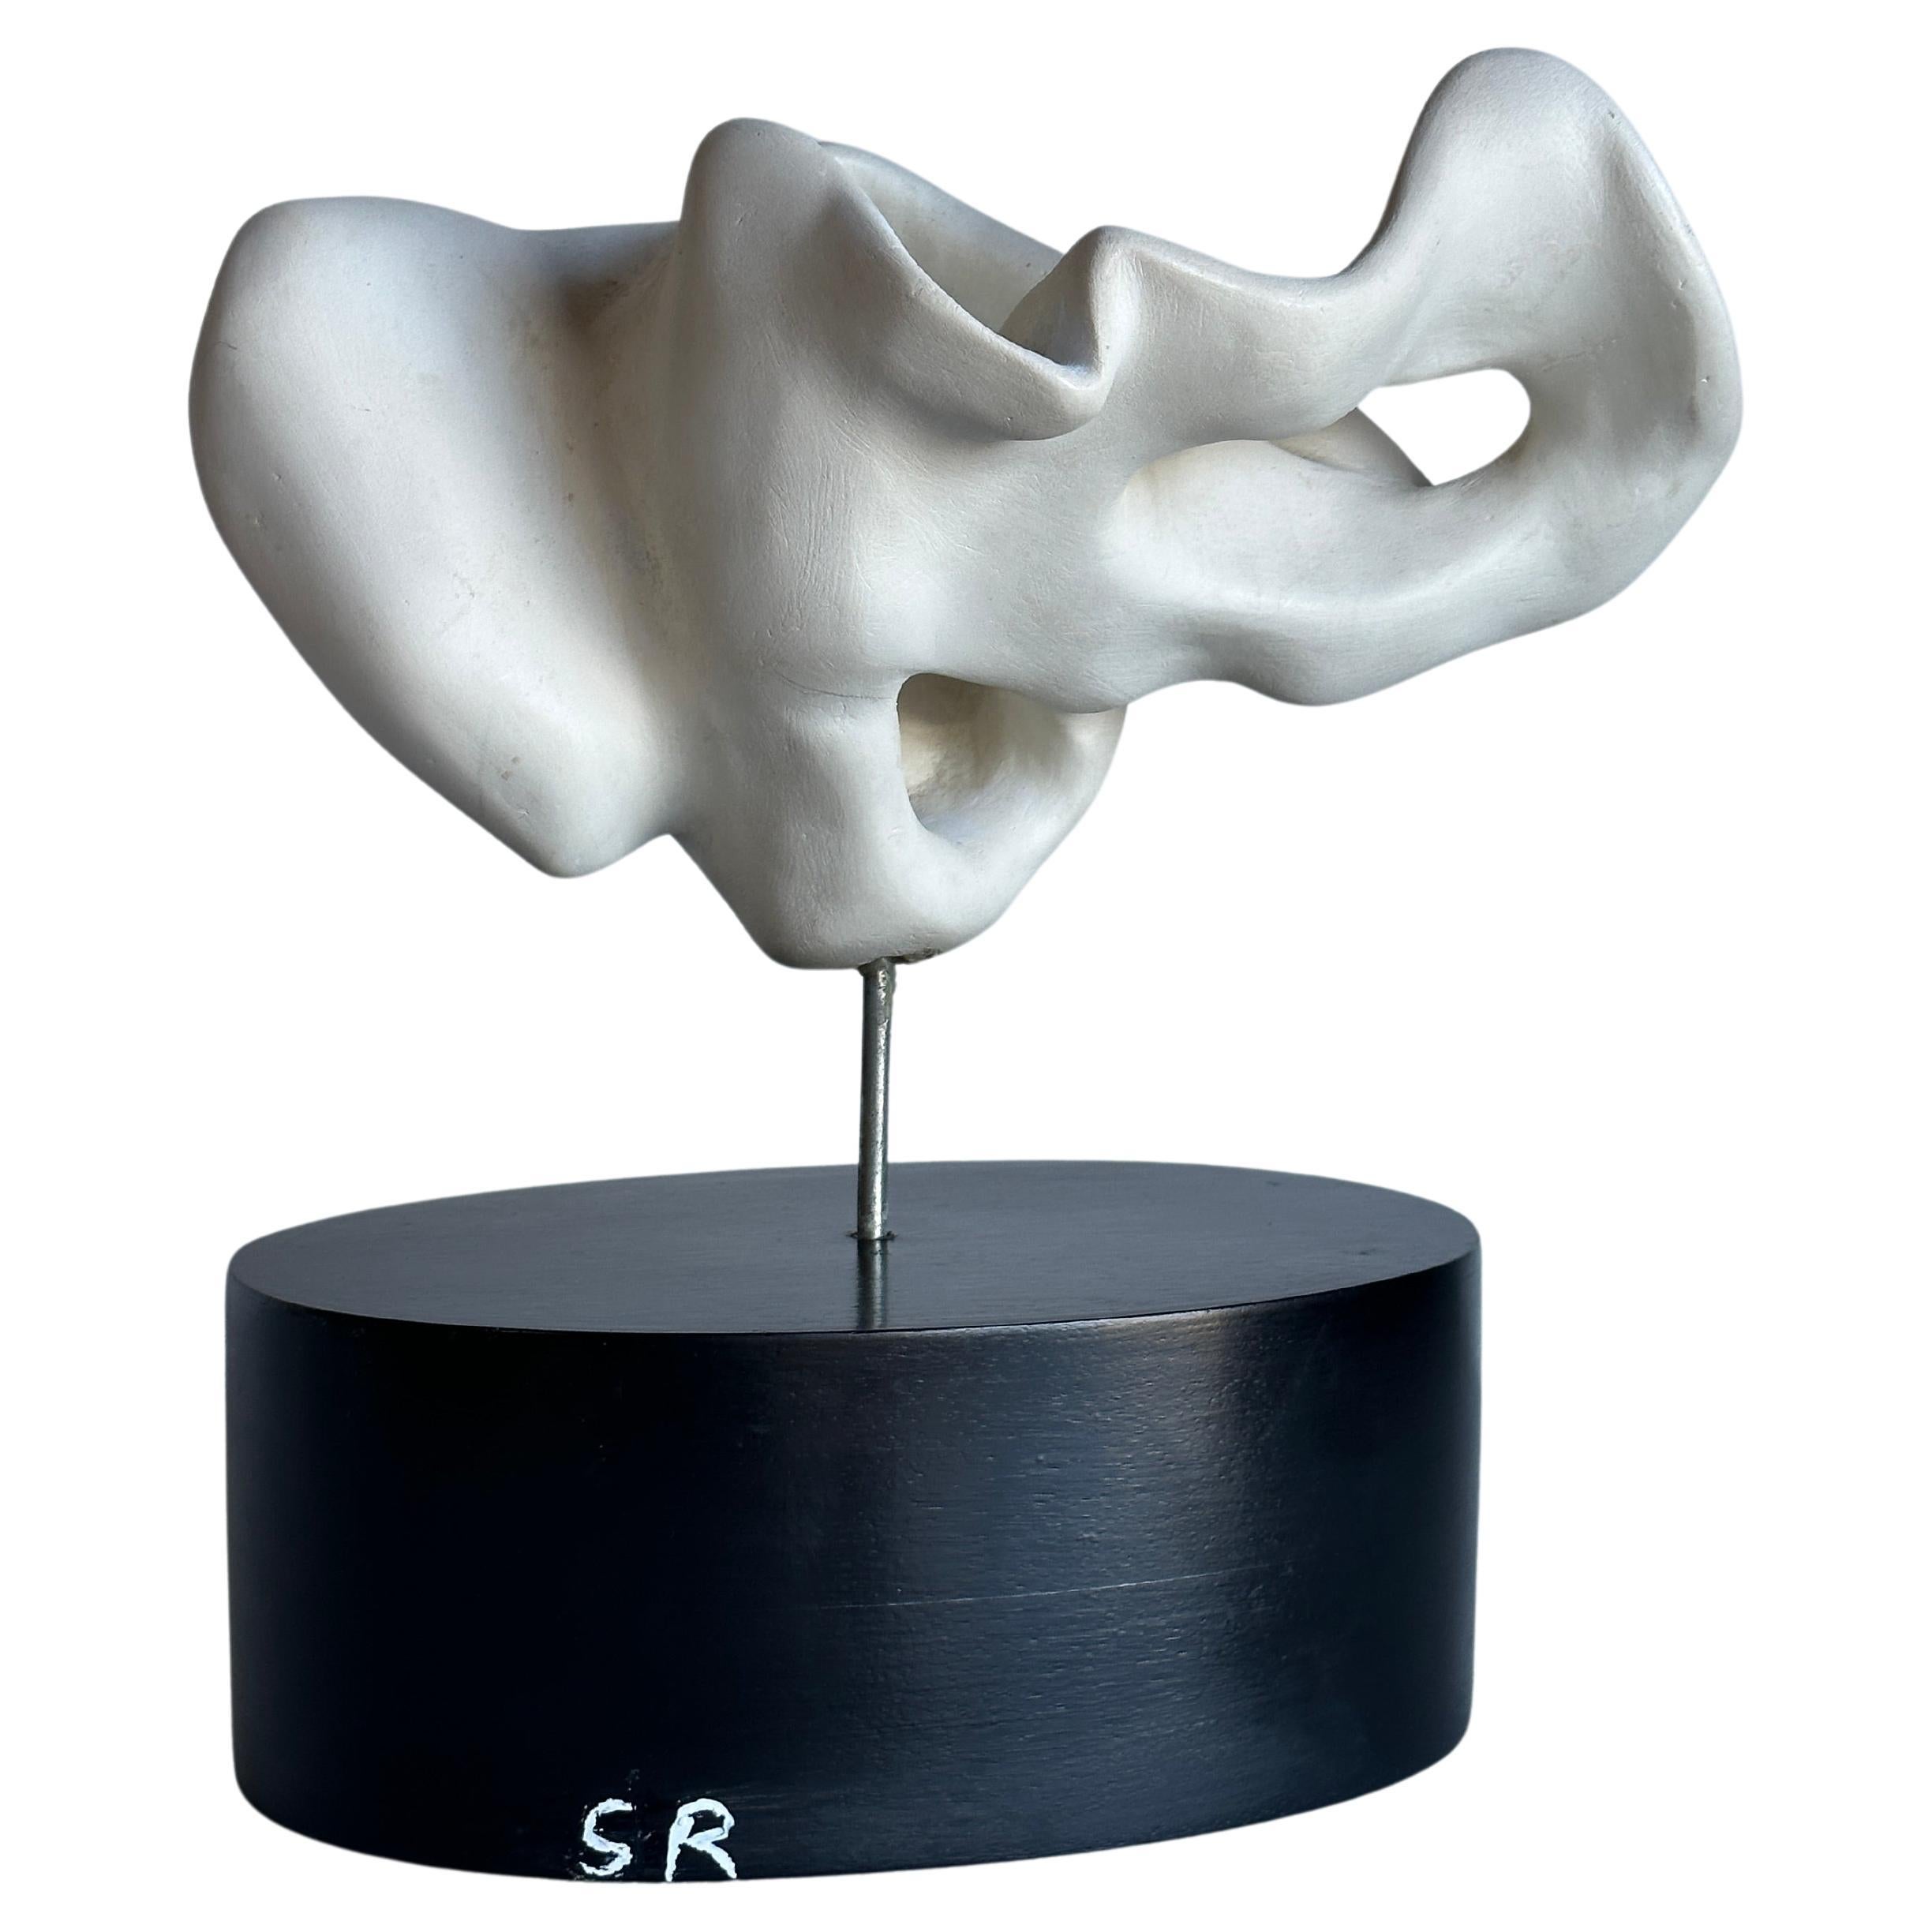 Artist Made White Plaster Biomorphic Tabletop Sculpture on Black Wood Stand